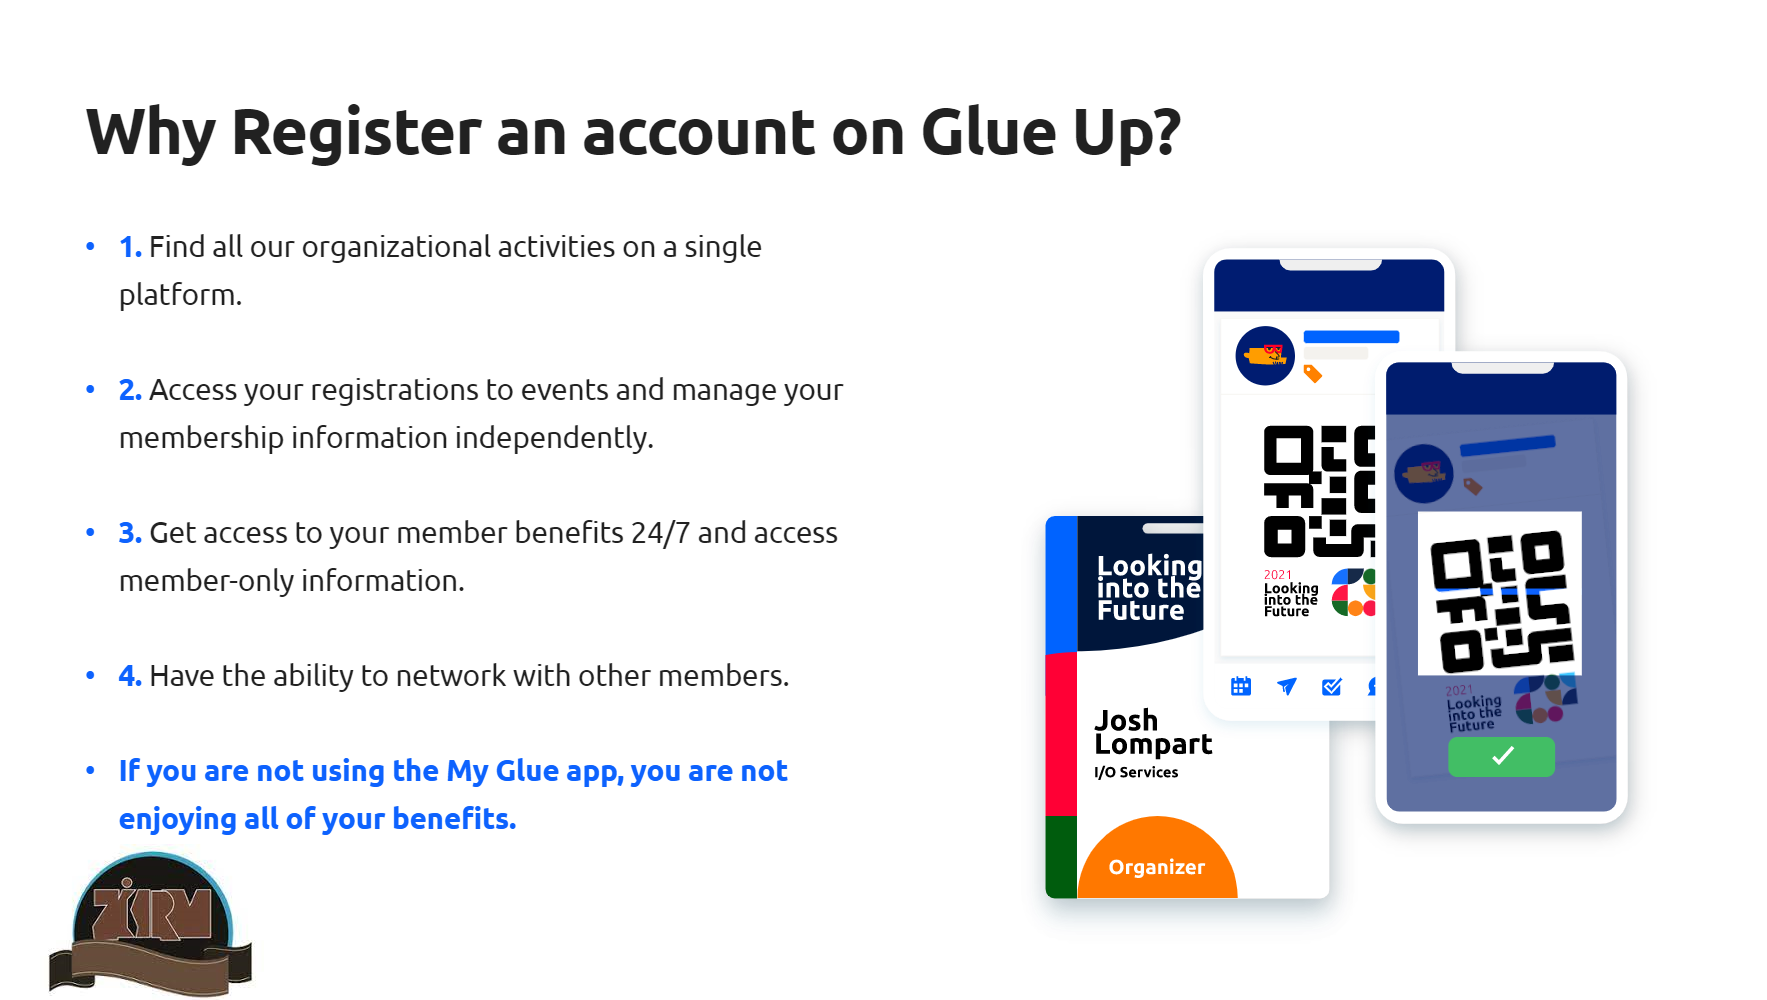 Why Register an Account on Glue-up